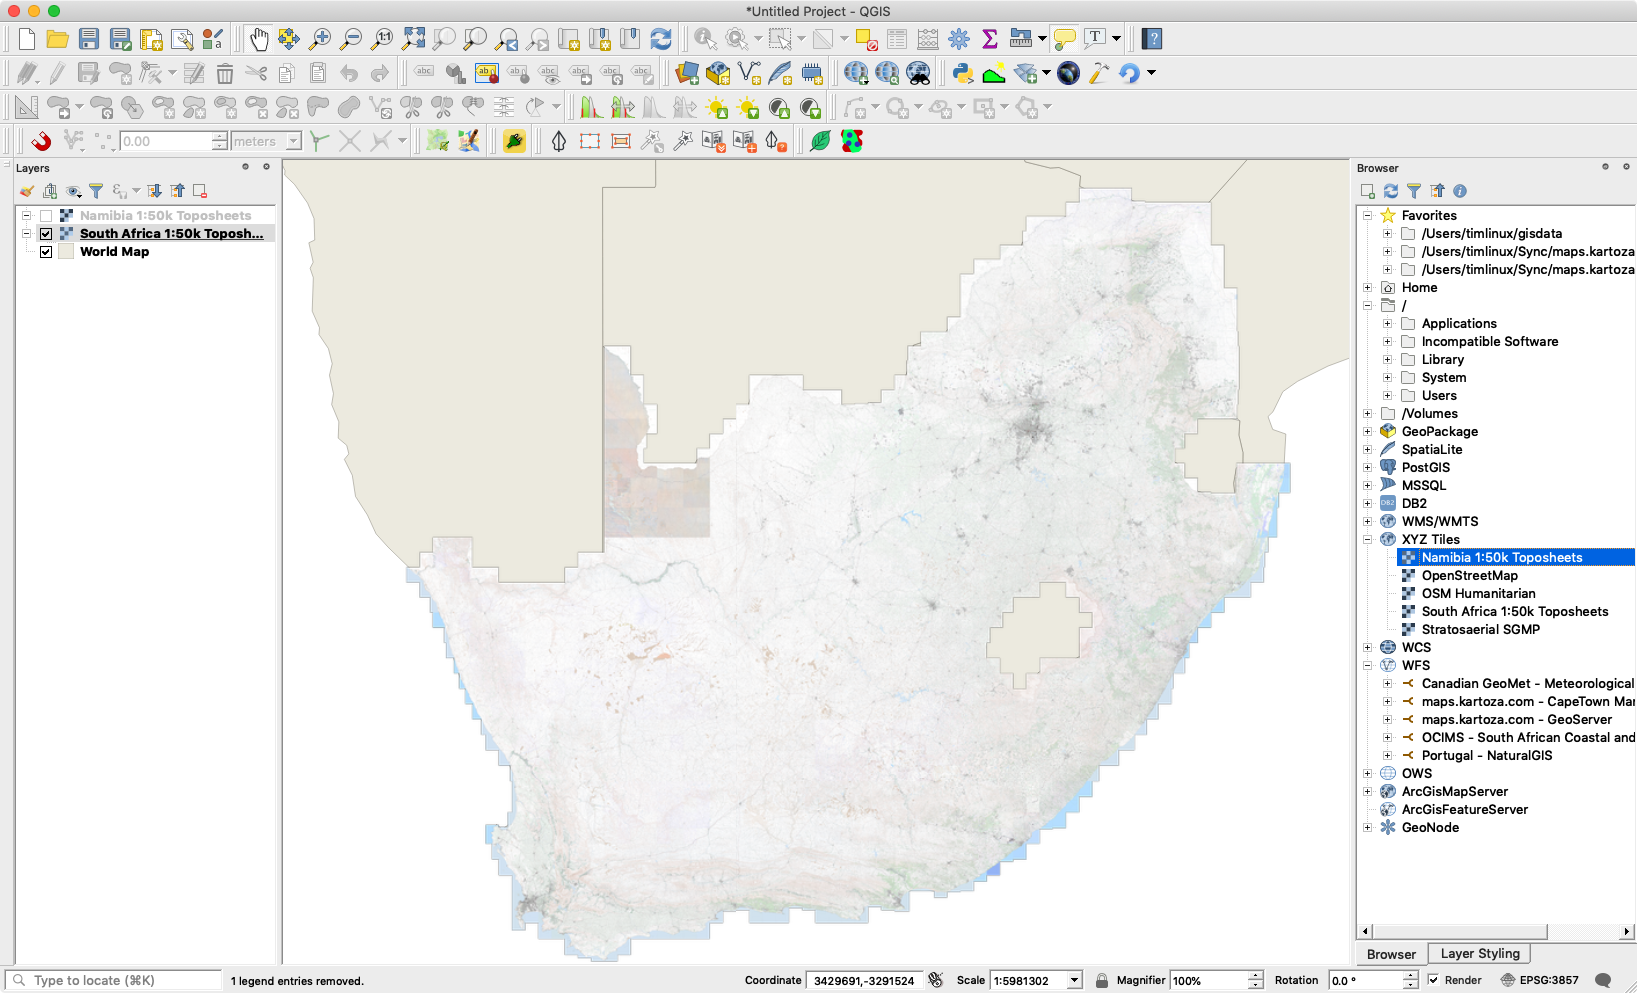 Drag the map layer into the QGIS Canvas